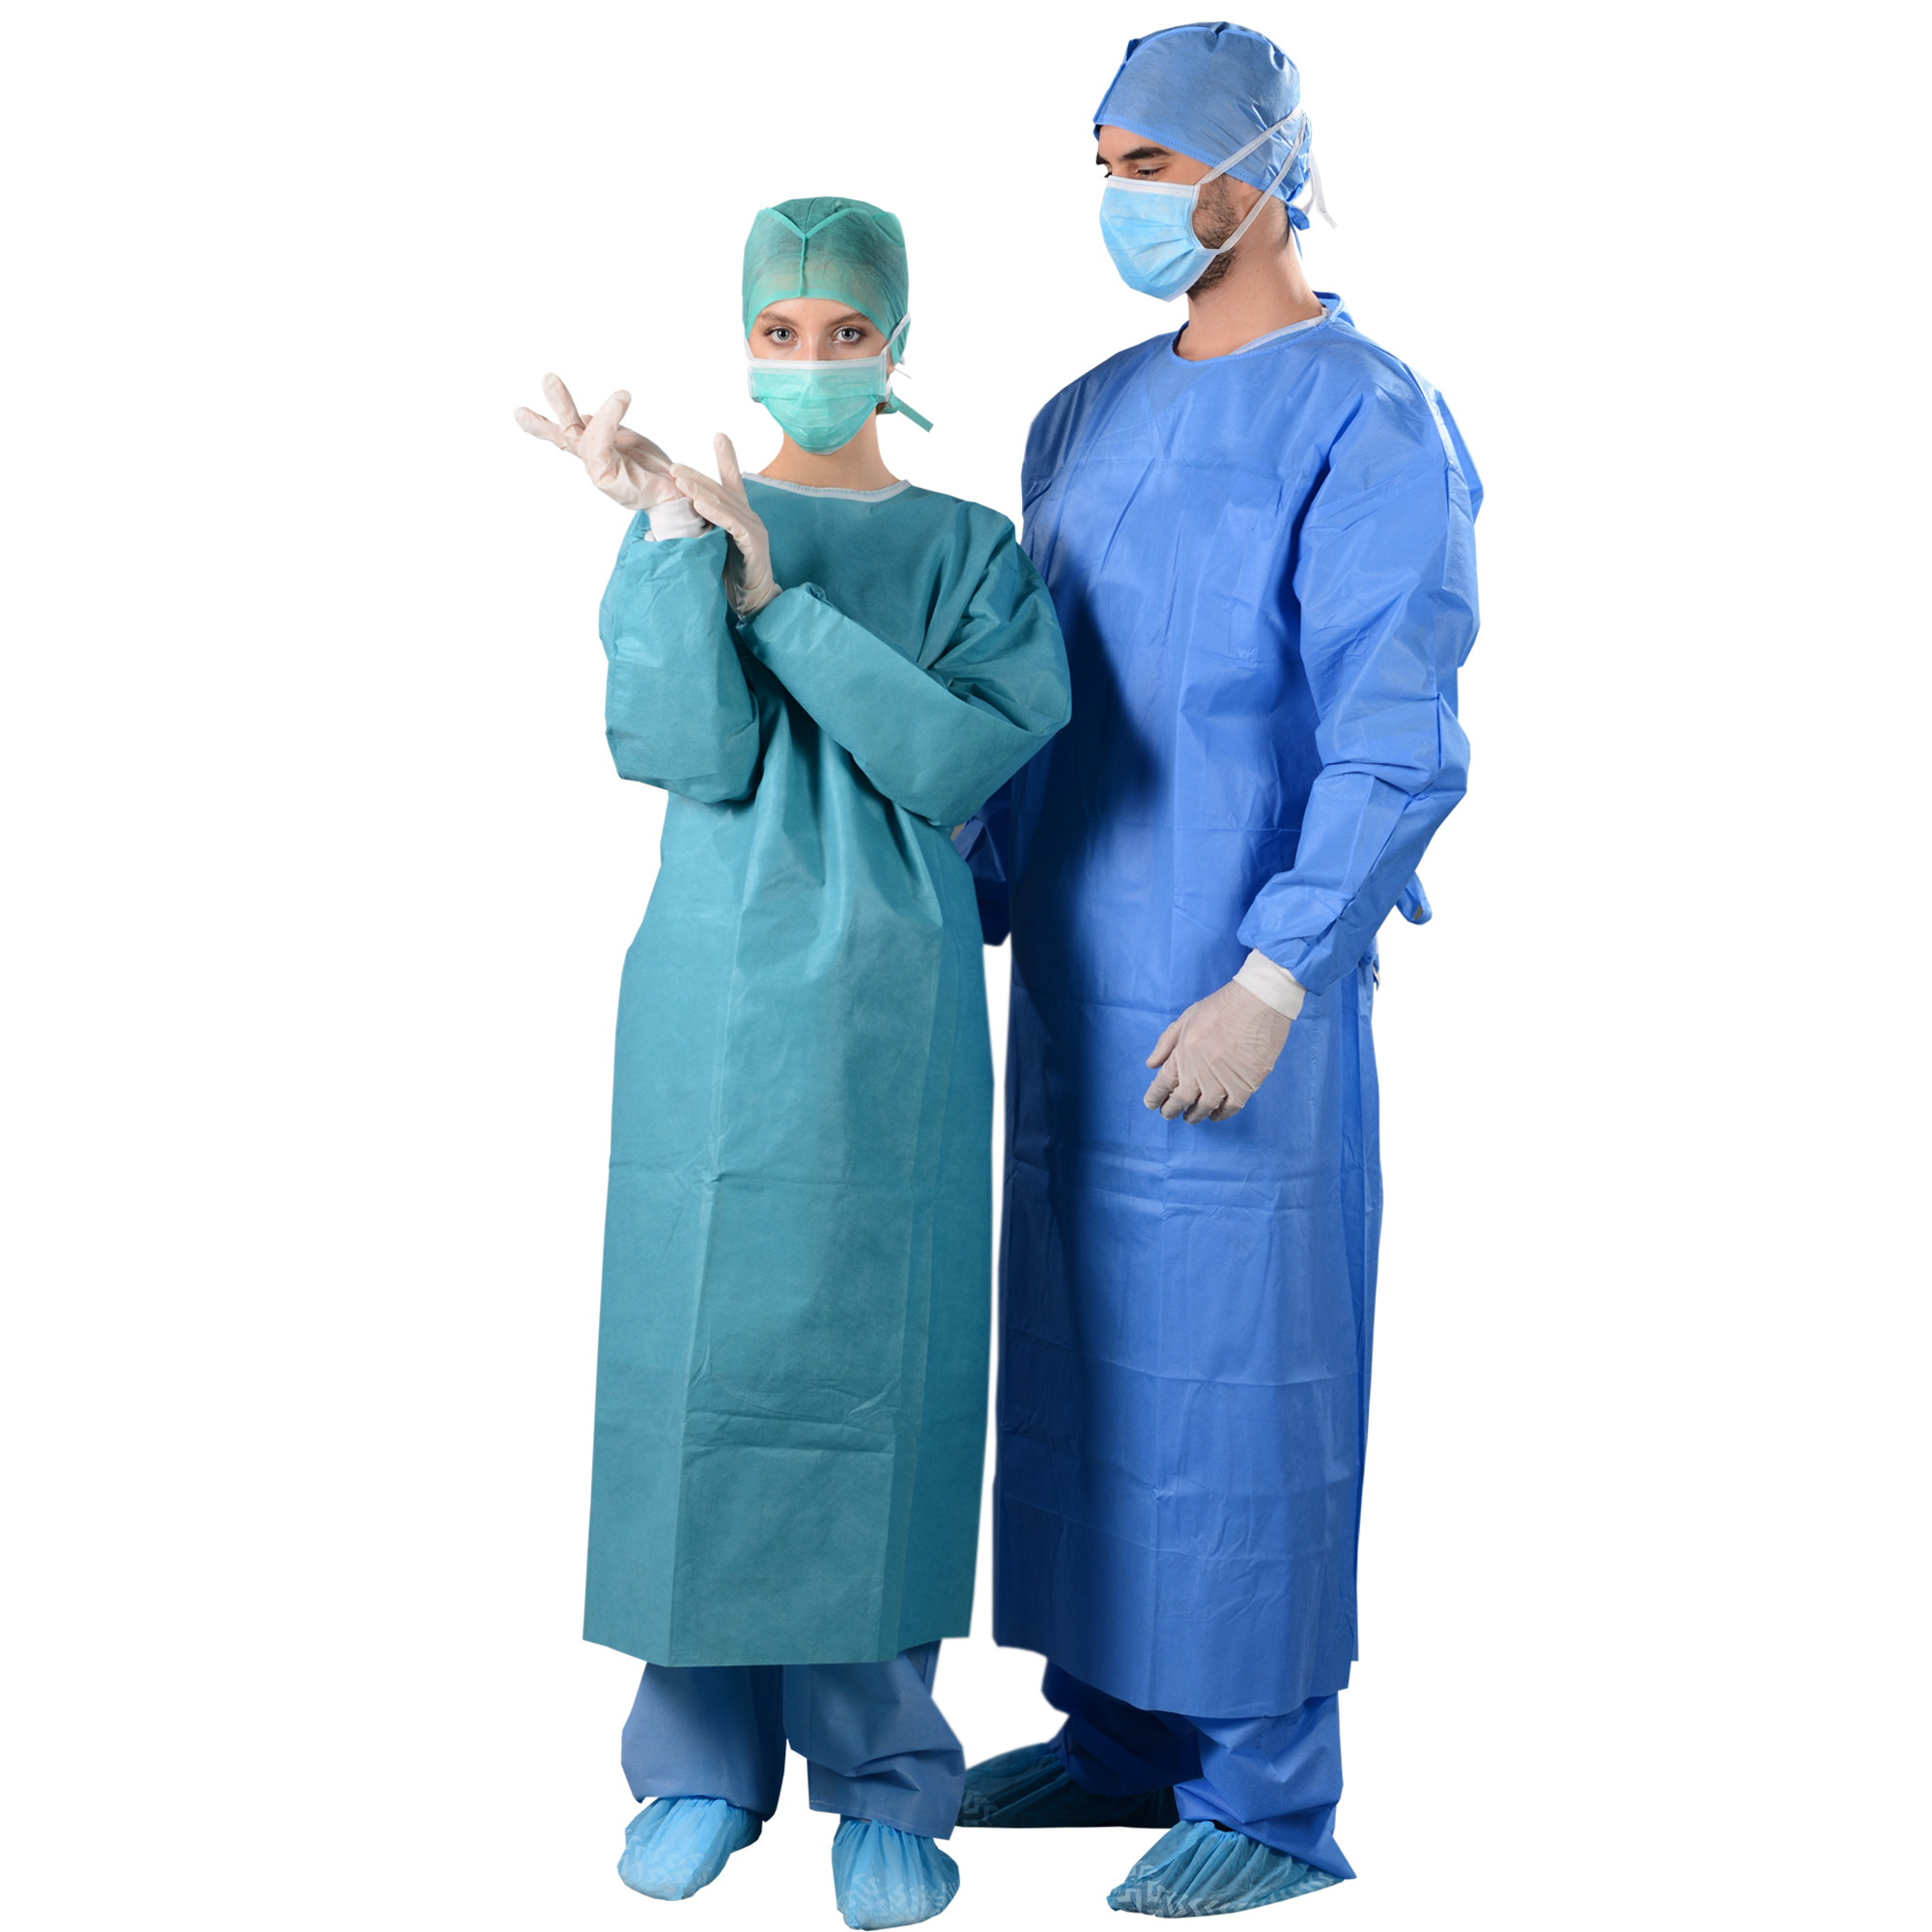 Disposable SMS surgical isolation gown 